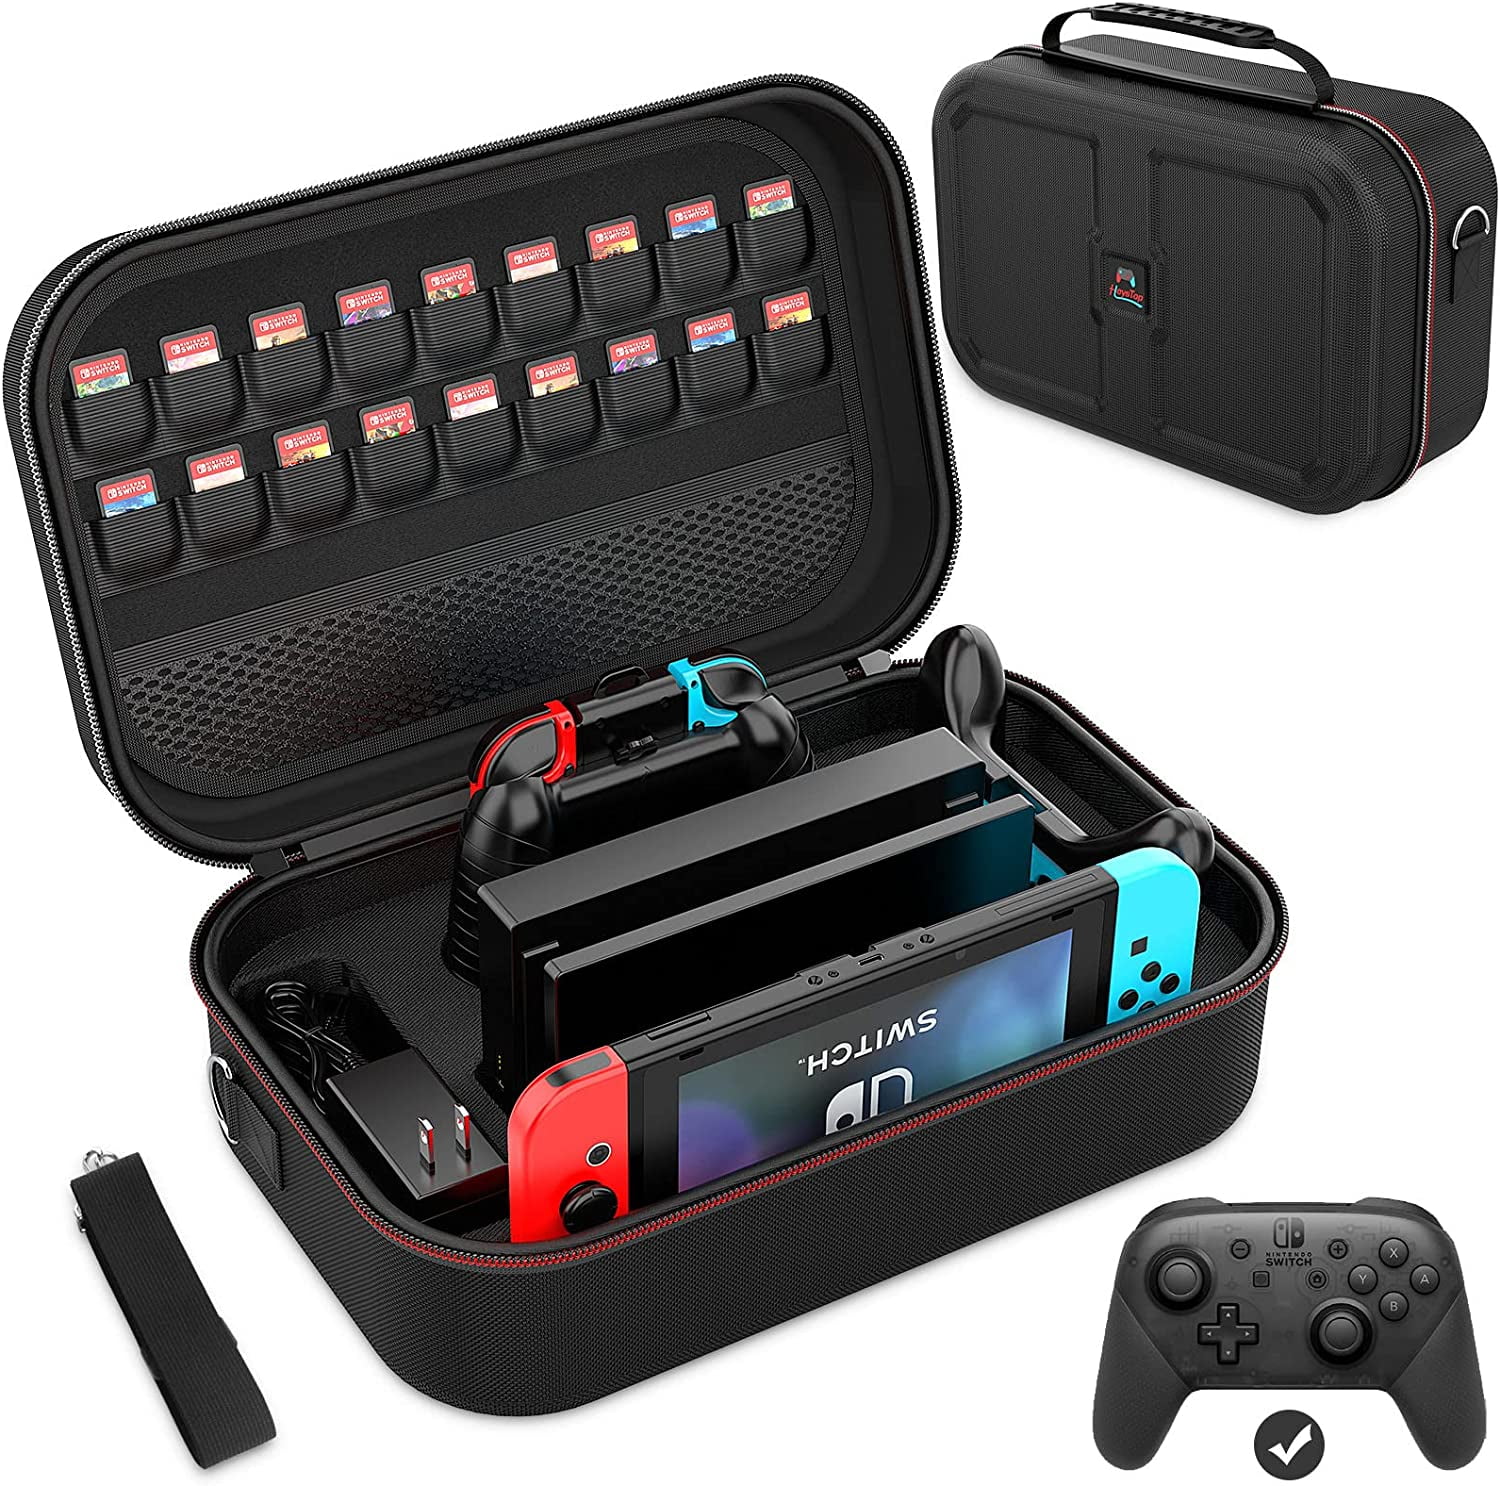  daydayup Switch Carrying Case Compatible with Nintendo Switch/Switch  OLED, with 20 Games Cartridges Protective Hard Shell Travel Carrying Case  Pouch for Console & Accessories, Black : Everything Else